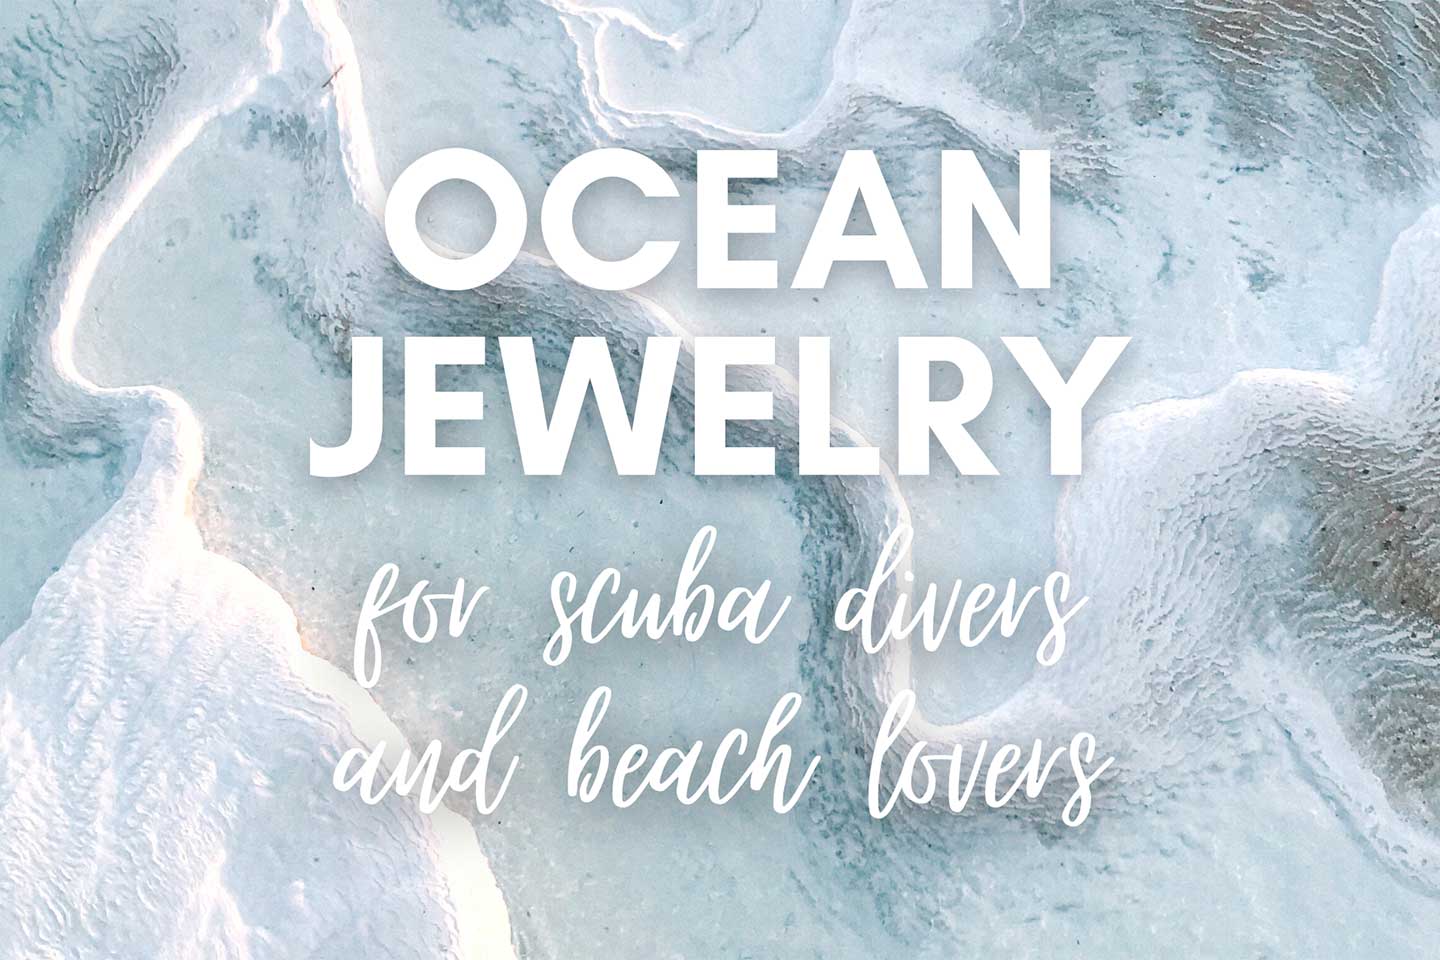 Ocean Jewelry for scuba divers and beach lovers